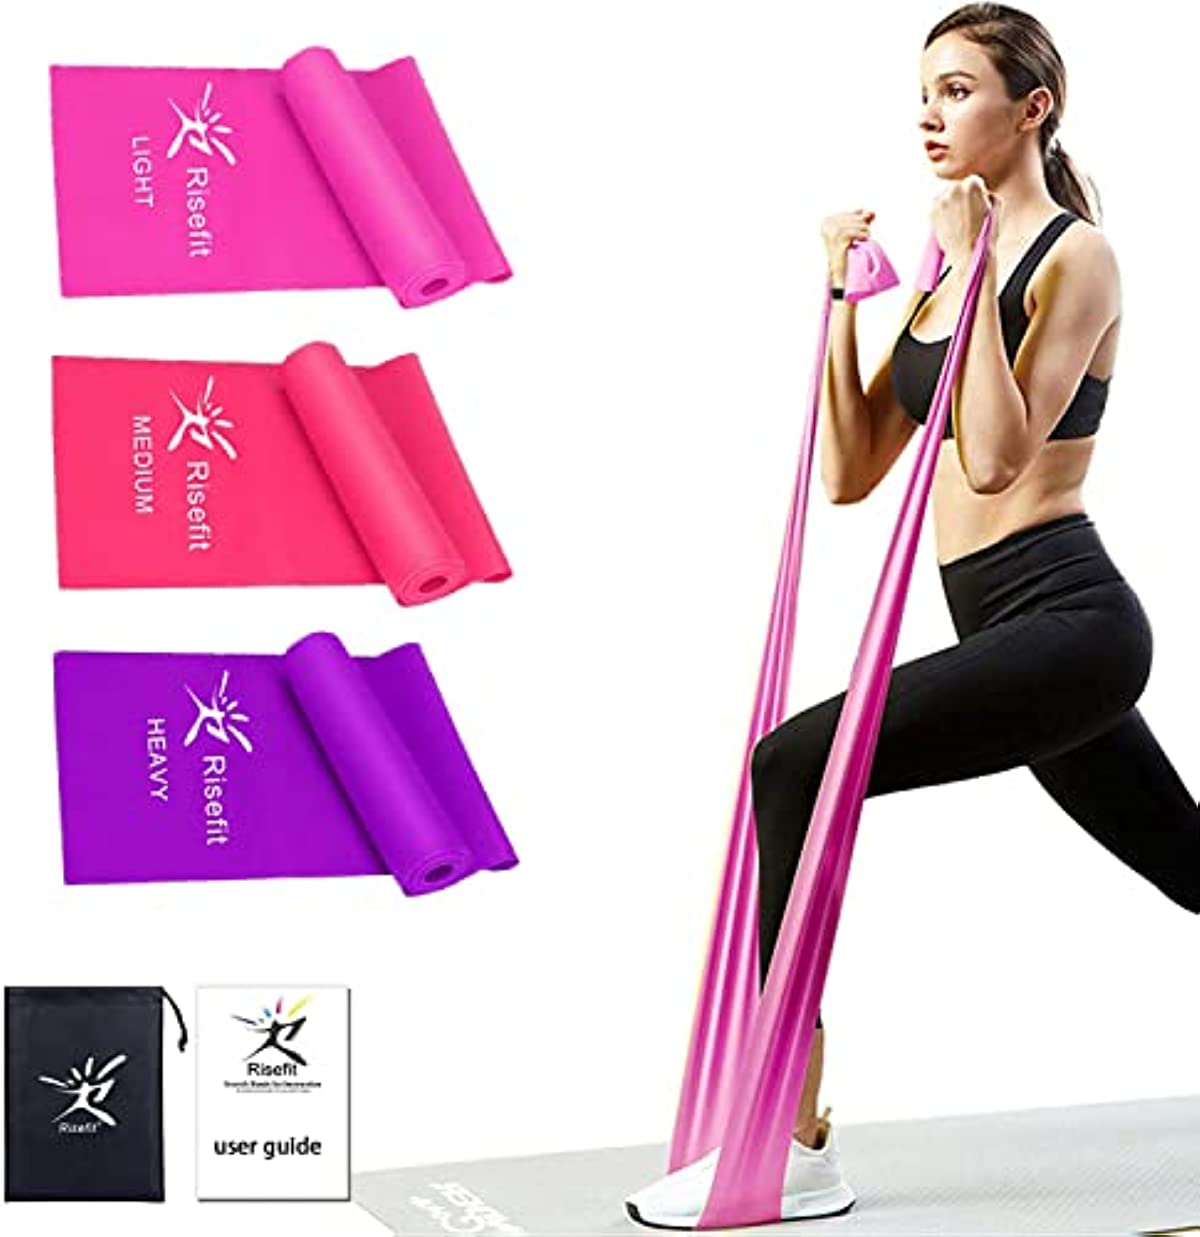 Risefit Resistance Bands Set 3PCs 5FT Long Latex Free Purple Stretch Bands for Working Out Therapy Exercise theraband for Physical Therapy, Yoga Ballet Dance Pilates Rehab